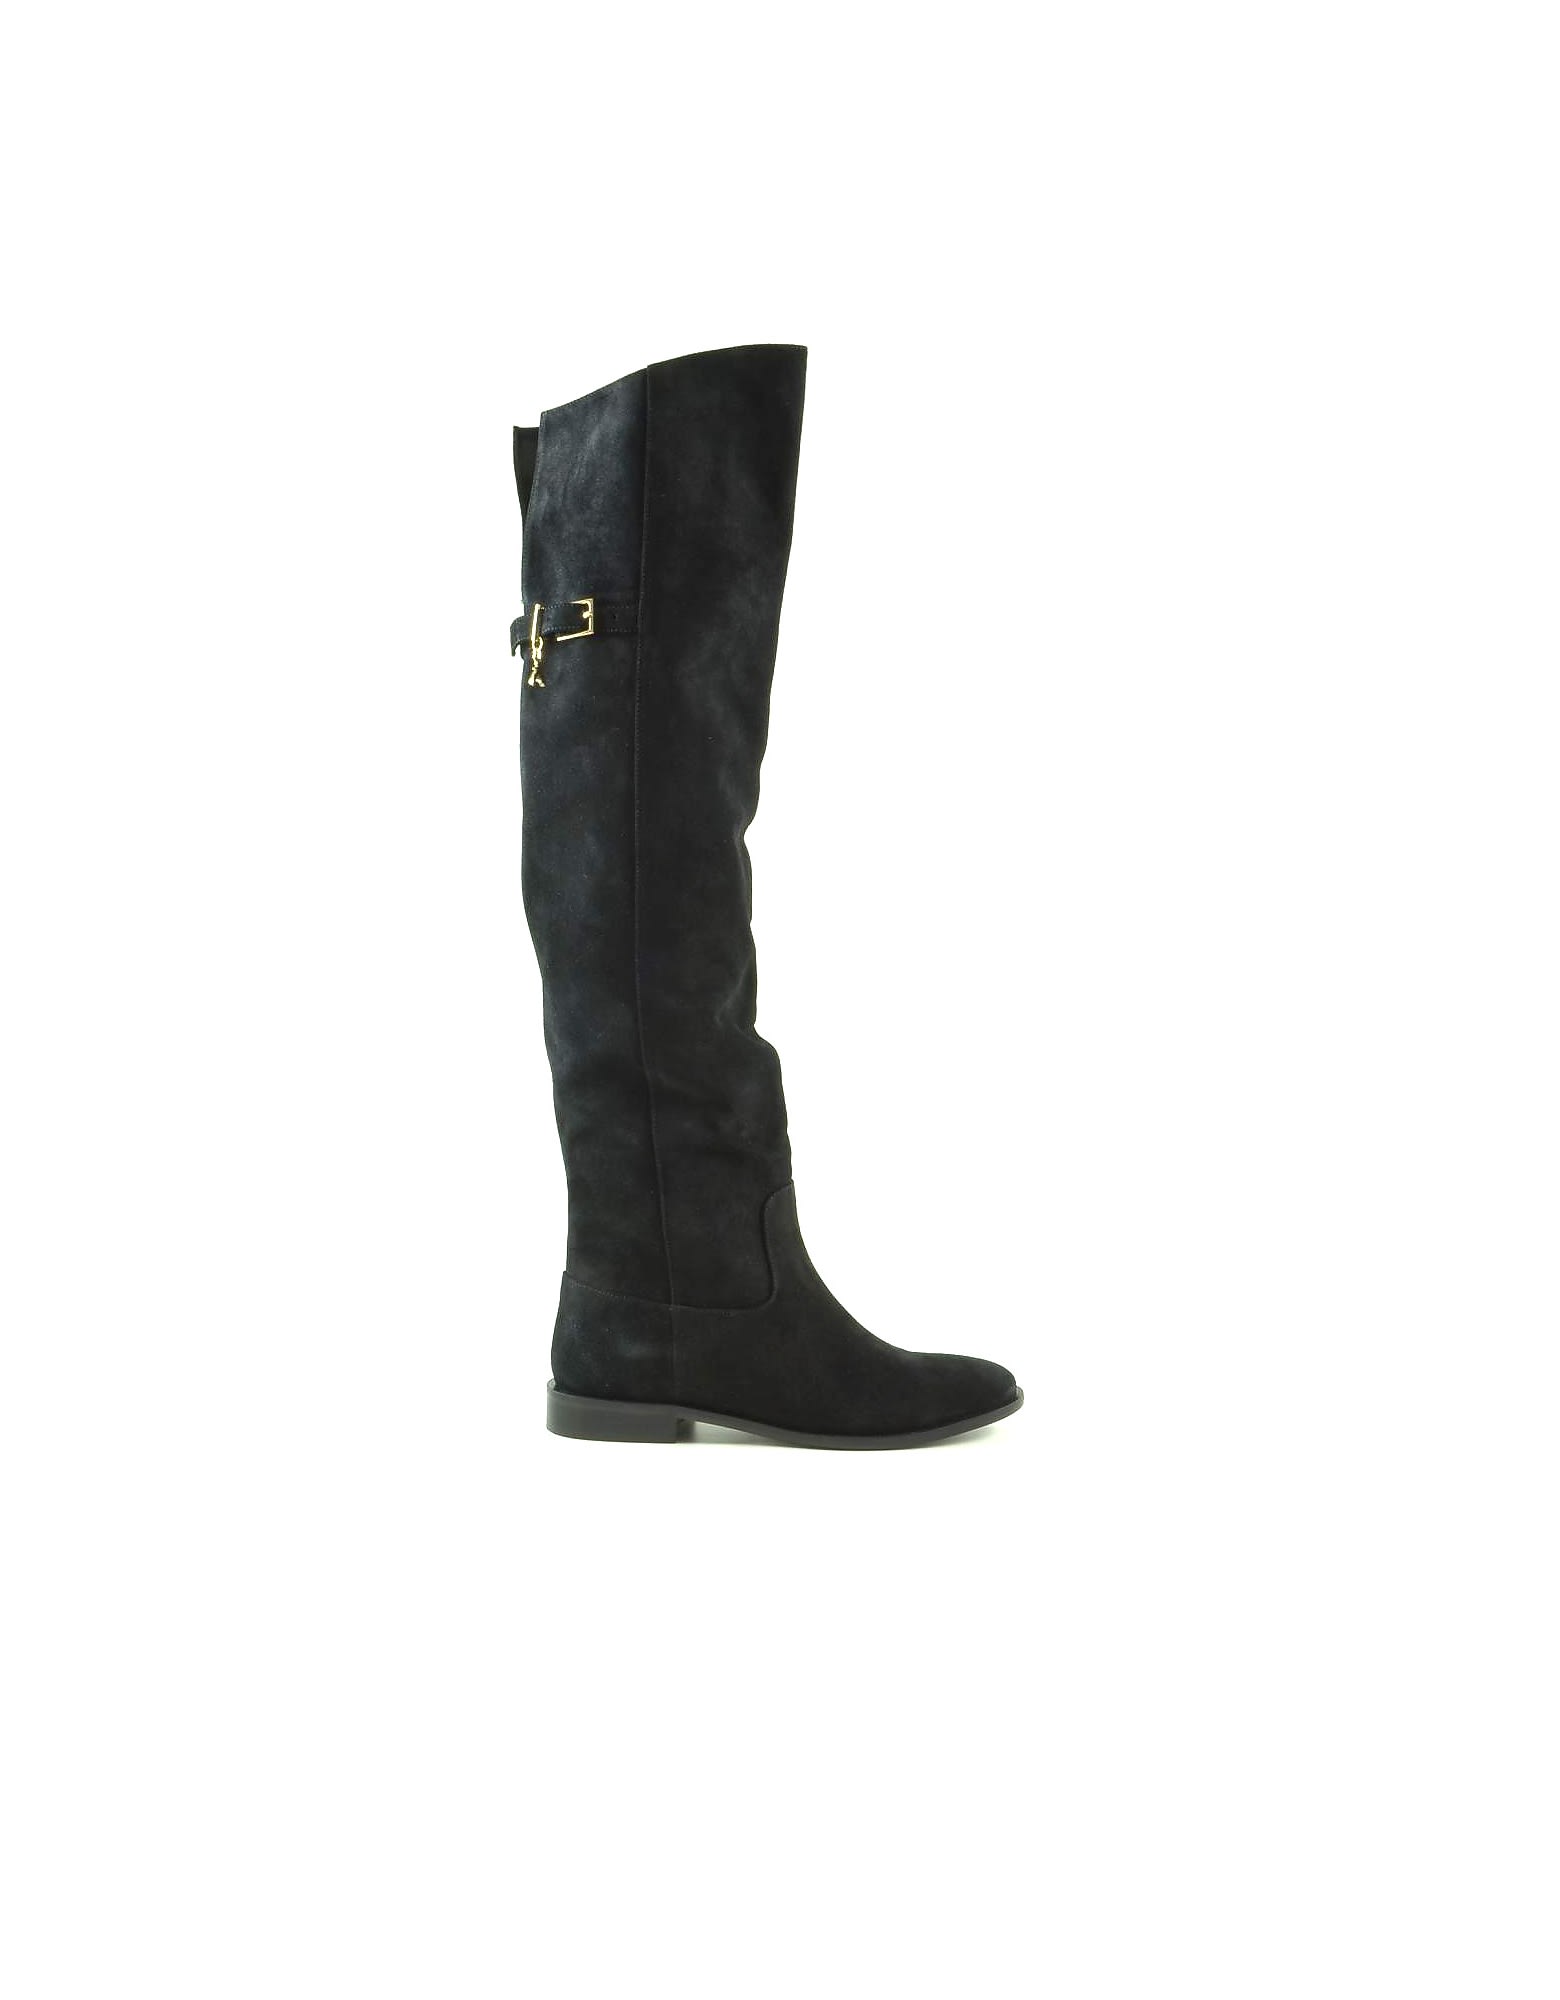 Patrizia Pepe Black Suede Over-the-knee Cuissardes Boots